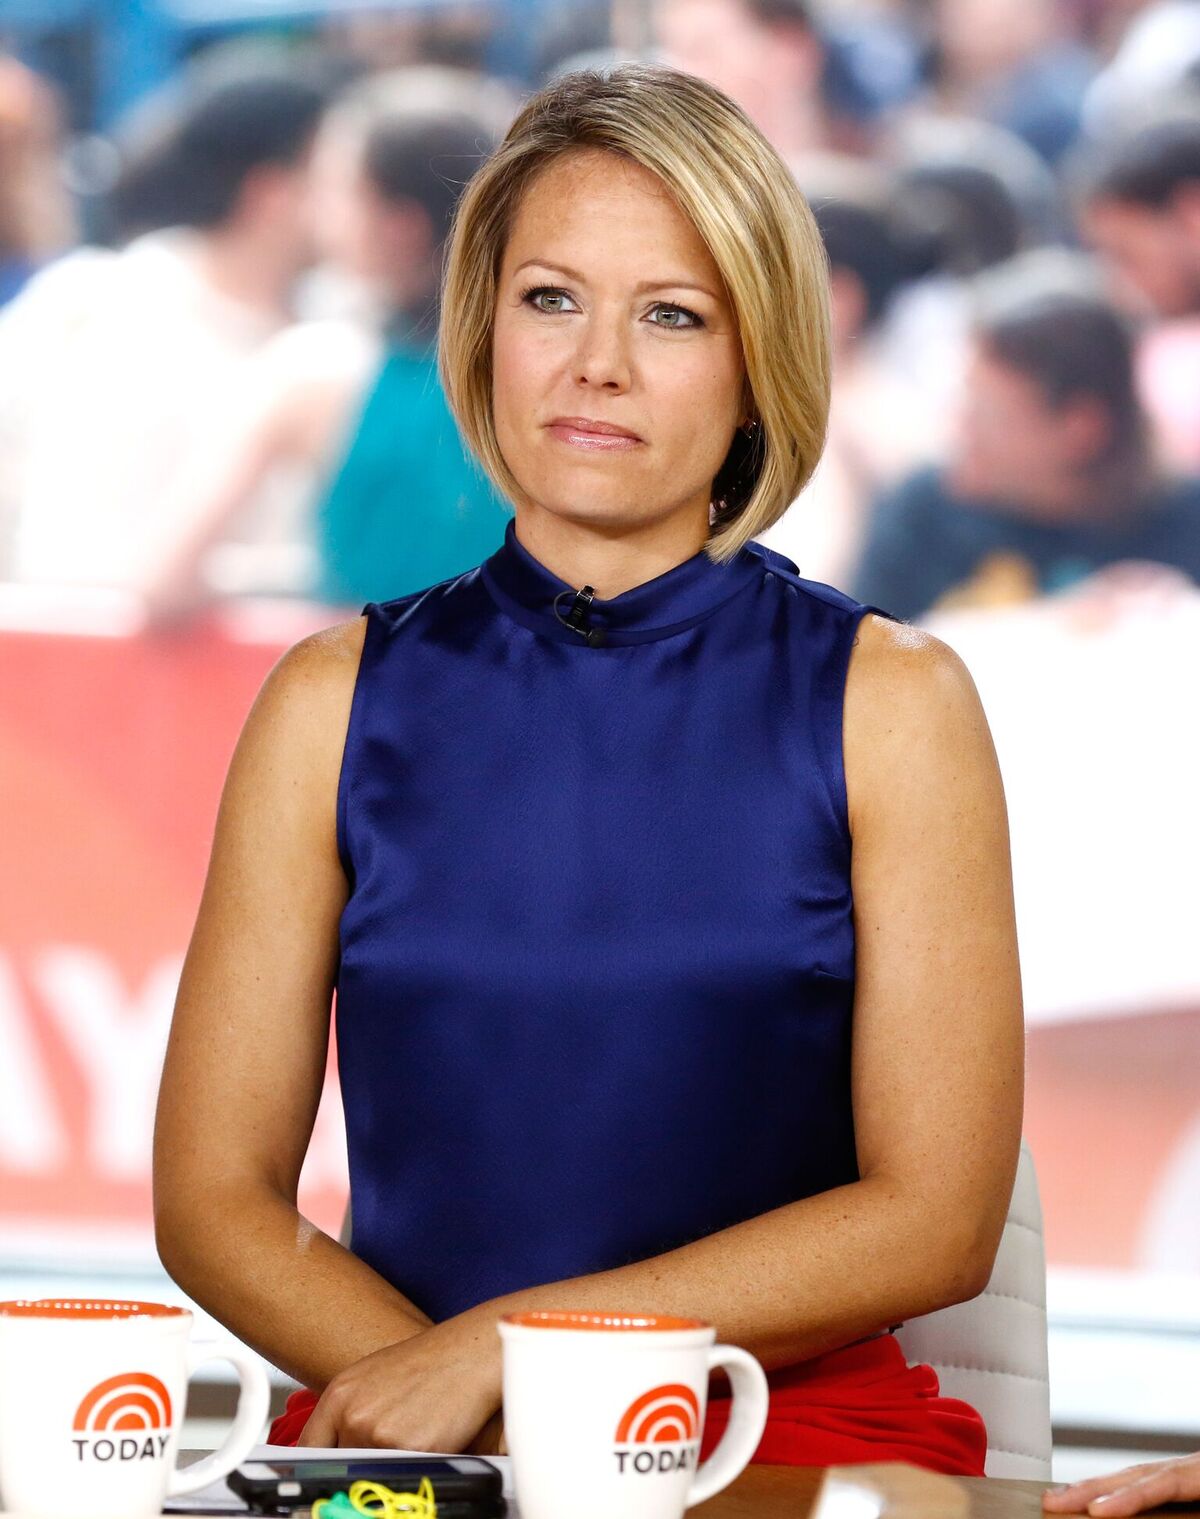 Dylan Dreyer appears on NBC News' "Today" show on September 01, 2014 | Photo: Peter Kramer/NBC/NBC Newswire/NBCUniversal/Getty Images)